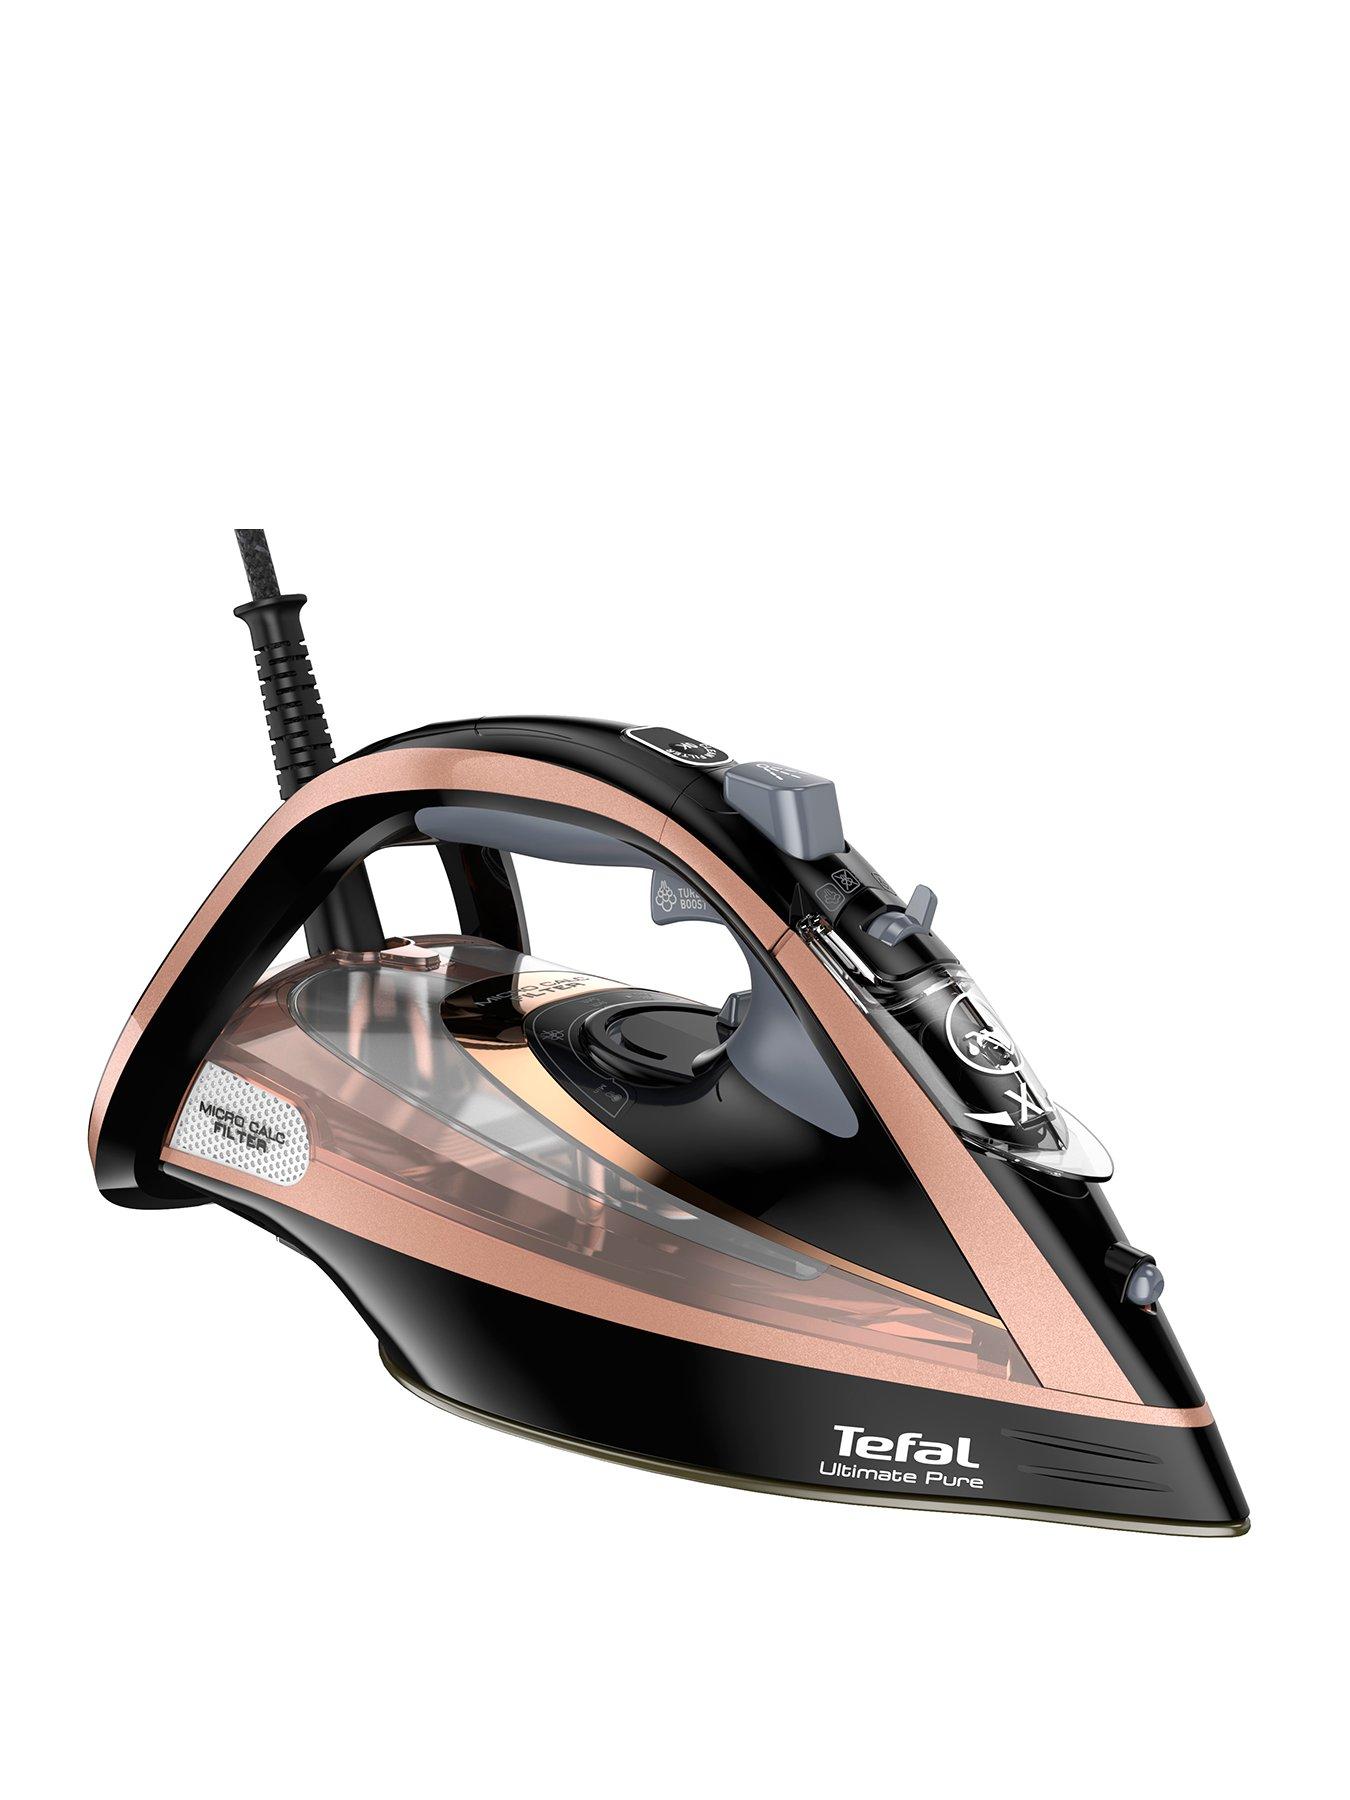 Tefal Ultimate Pure 260G/Min Steam Boost Steam Iron Fv9845